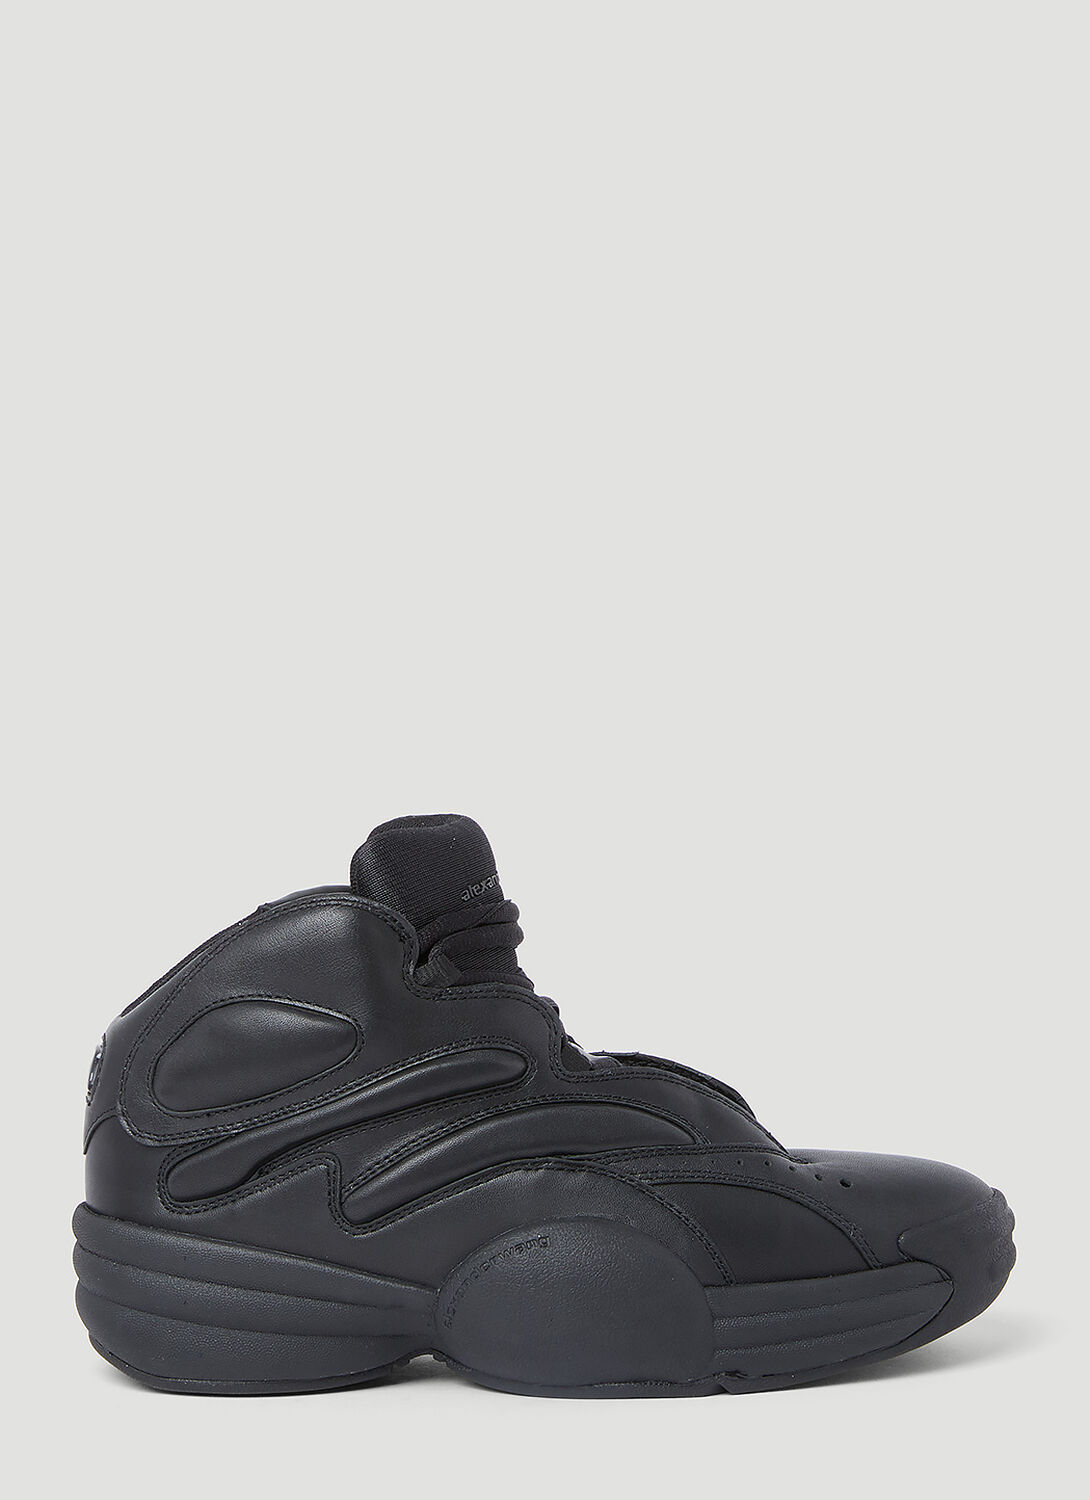 Alexander Wang Aw Hoop Leather Trainers In Black